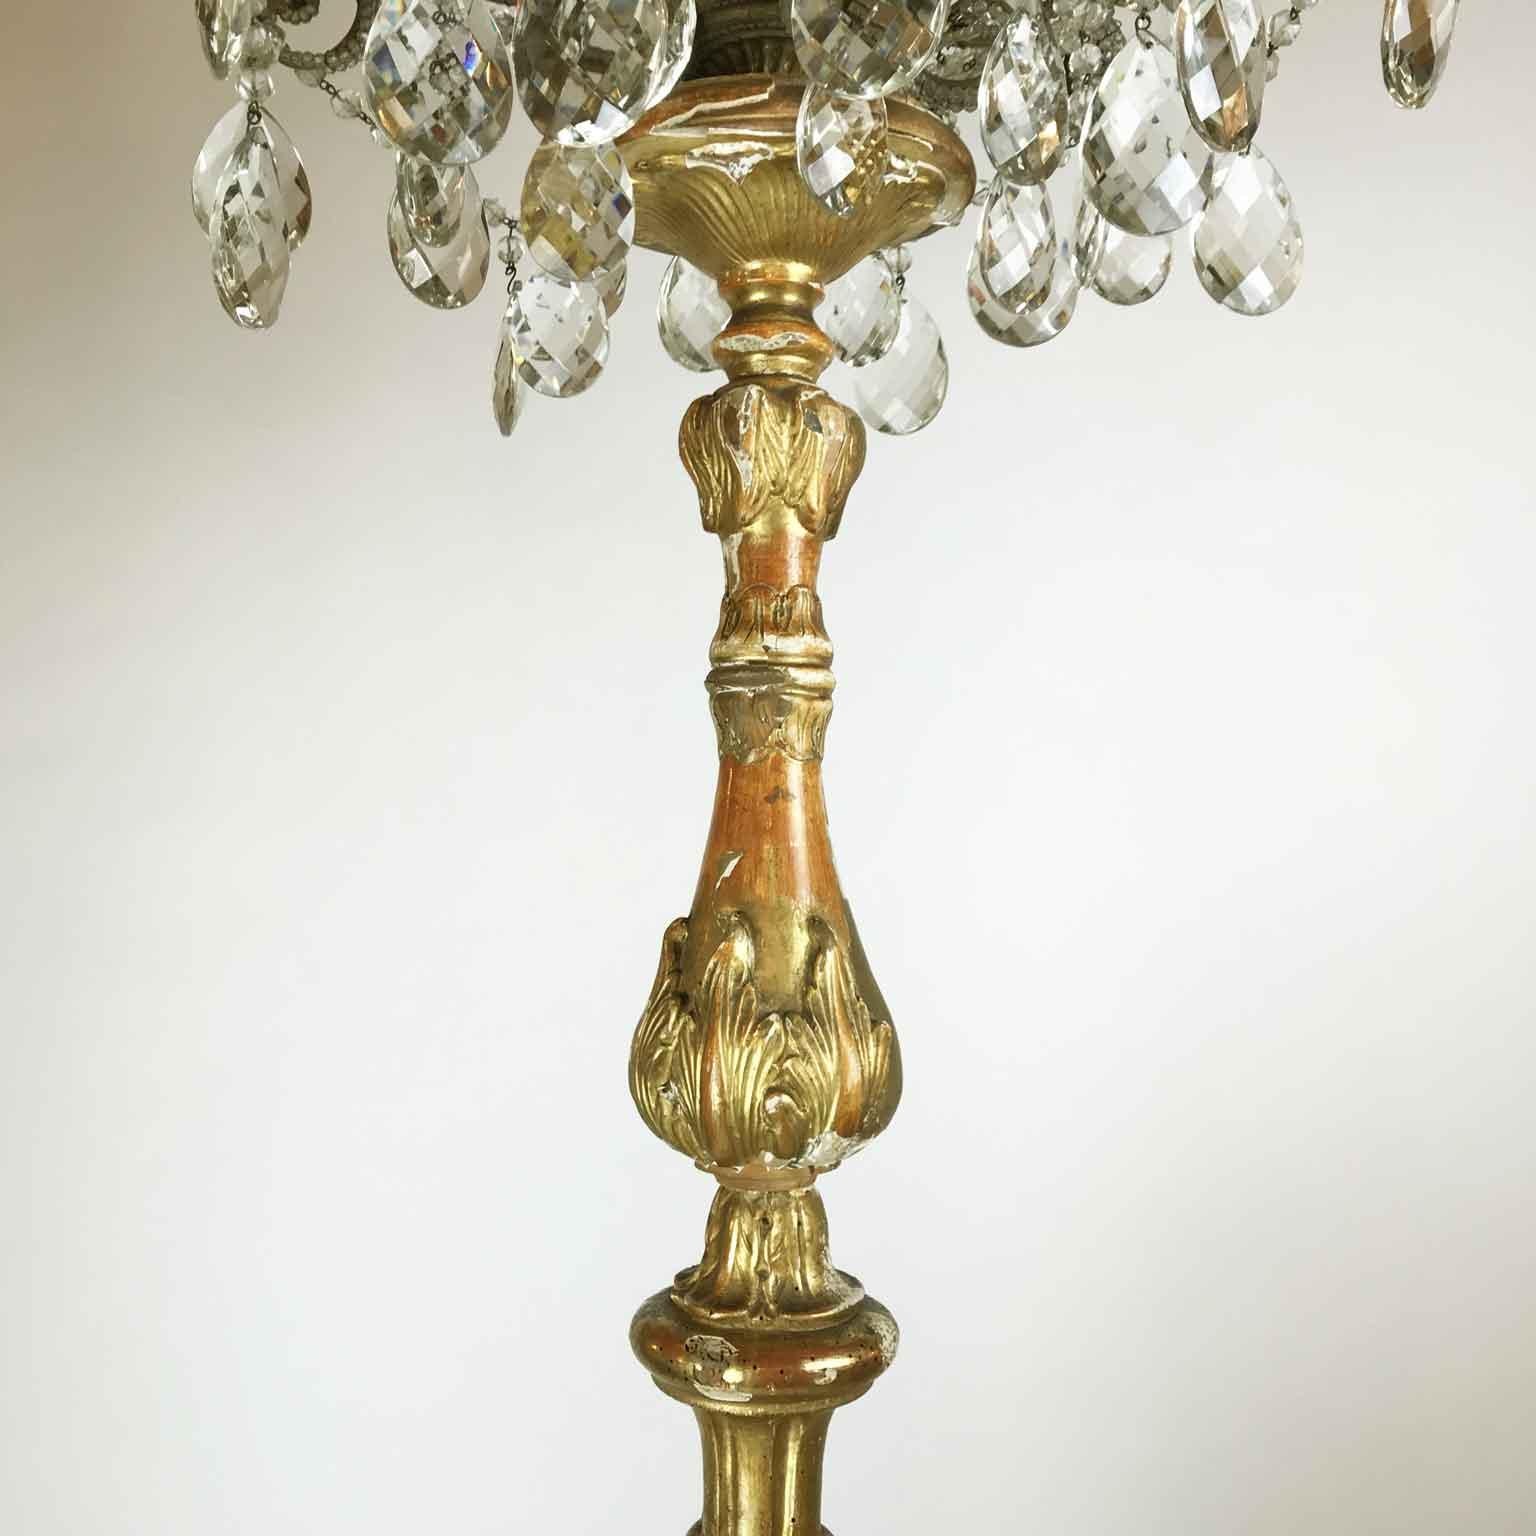 Neoclassical Pair of Italian Louis XV Gilt Candlesticks Tall Lamps with Crystal Flambeaux